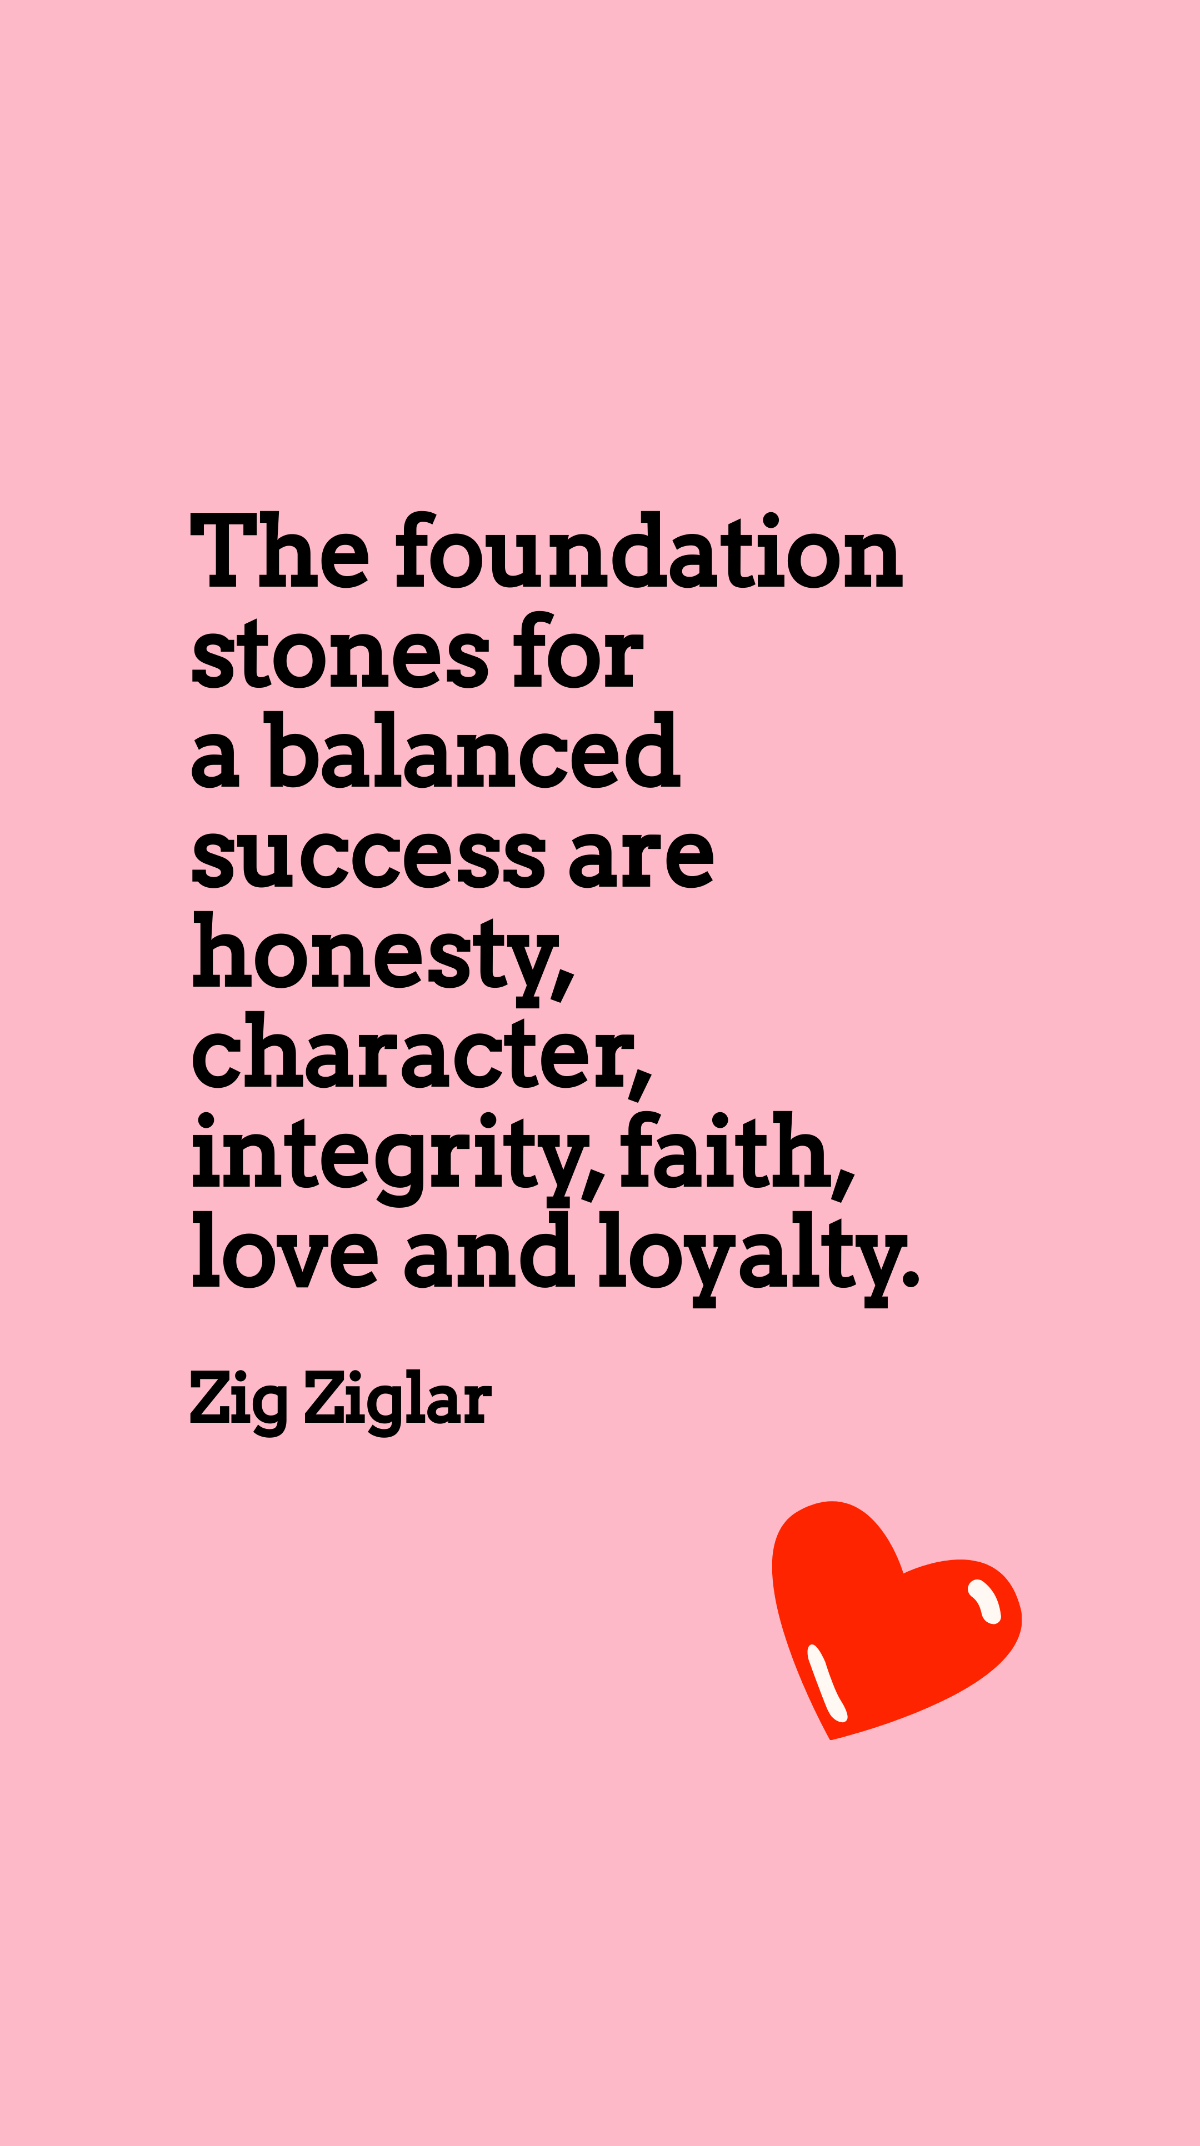 Free Zig Ziglar - The foundation stones for a balanced success are honesty, character, integrity, faith, love and loyalty. Template